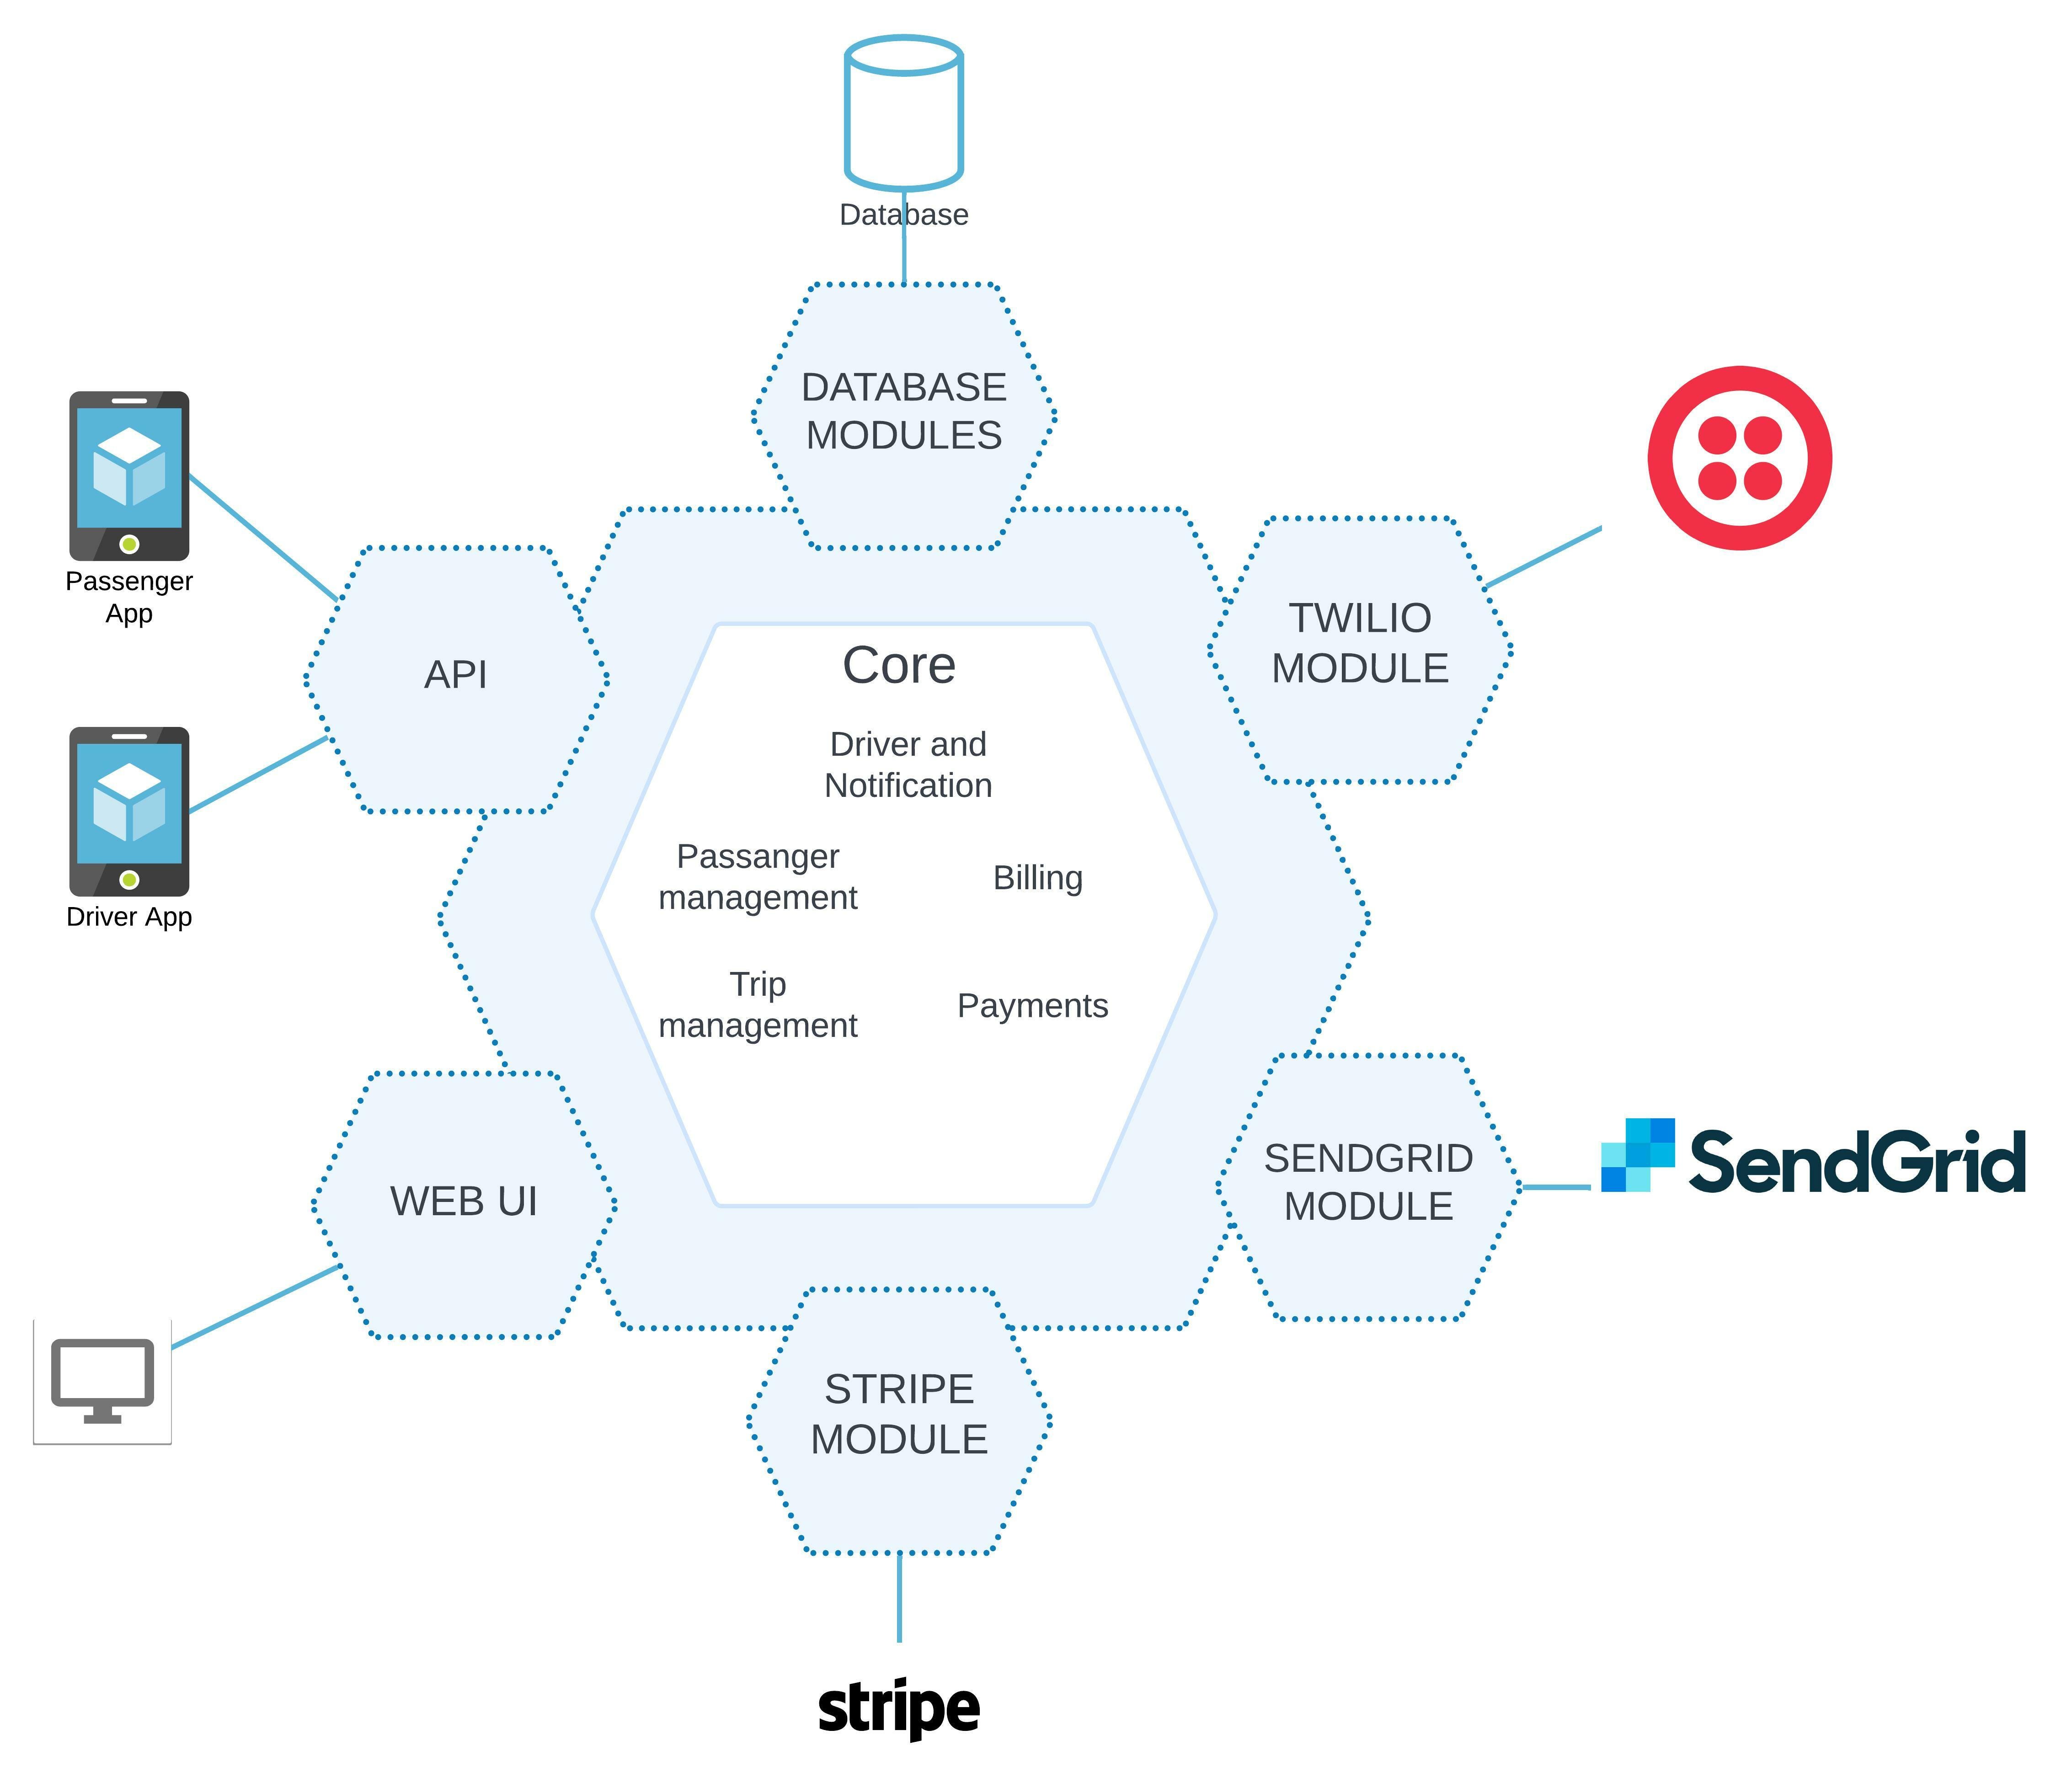 Multi-Cloud Strategies Using Microservices Architecture